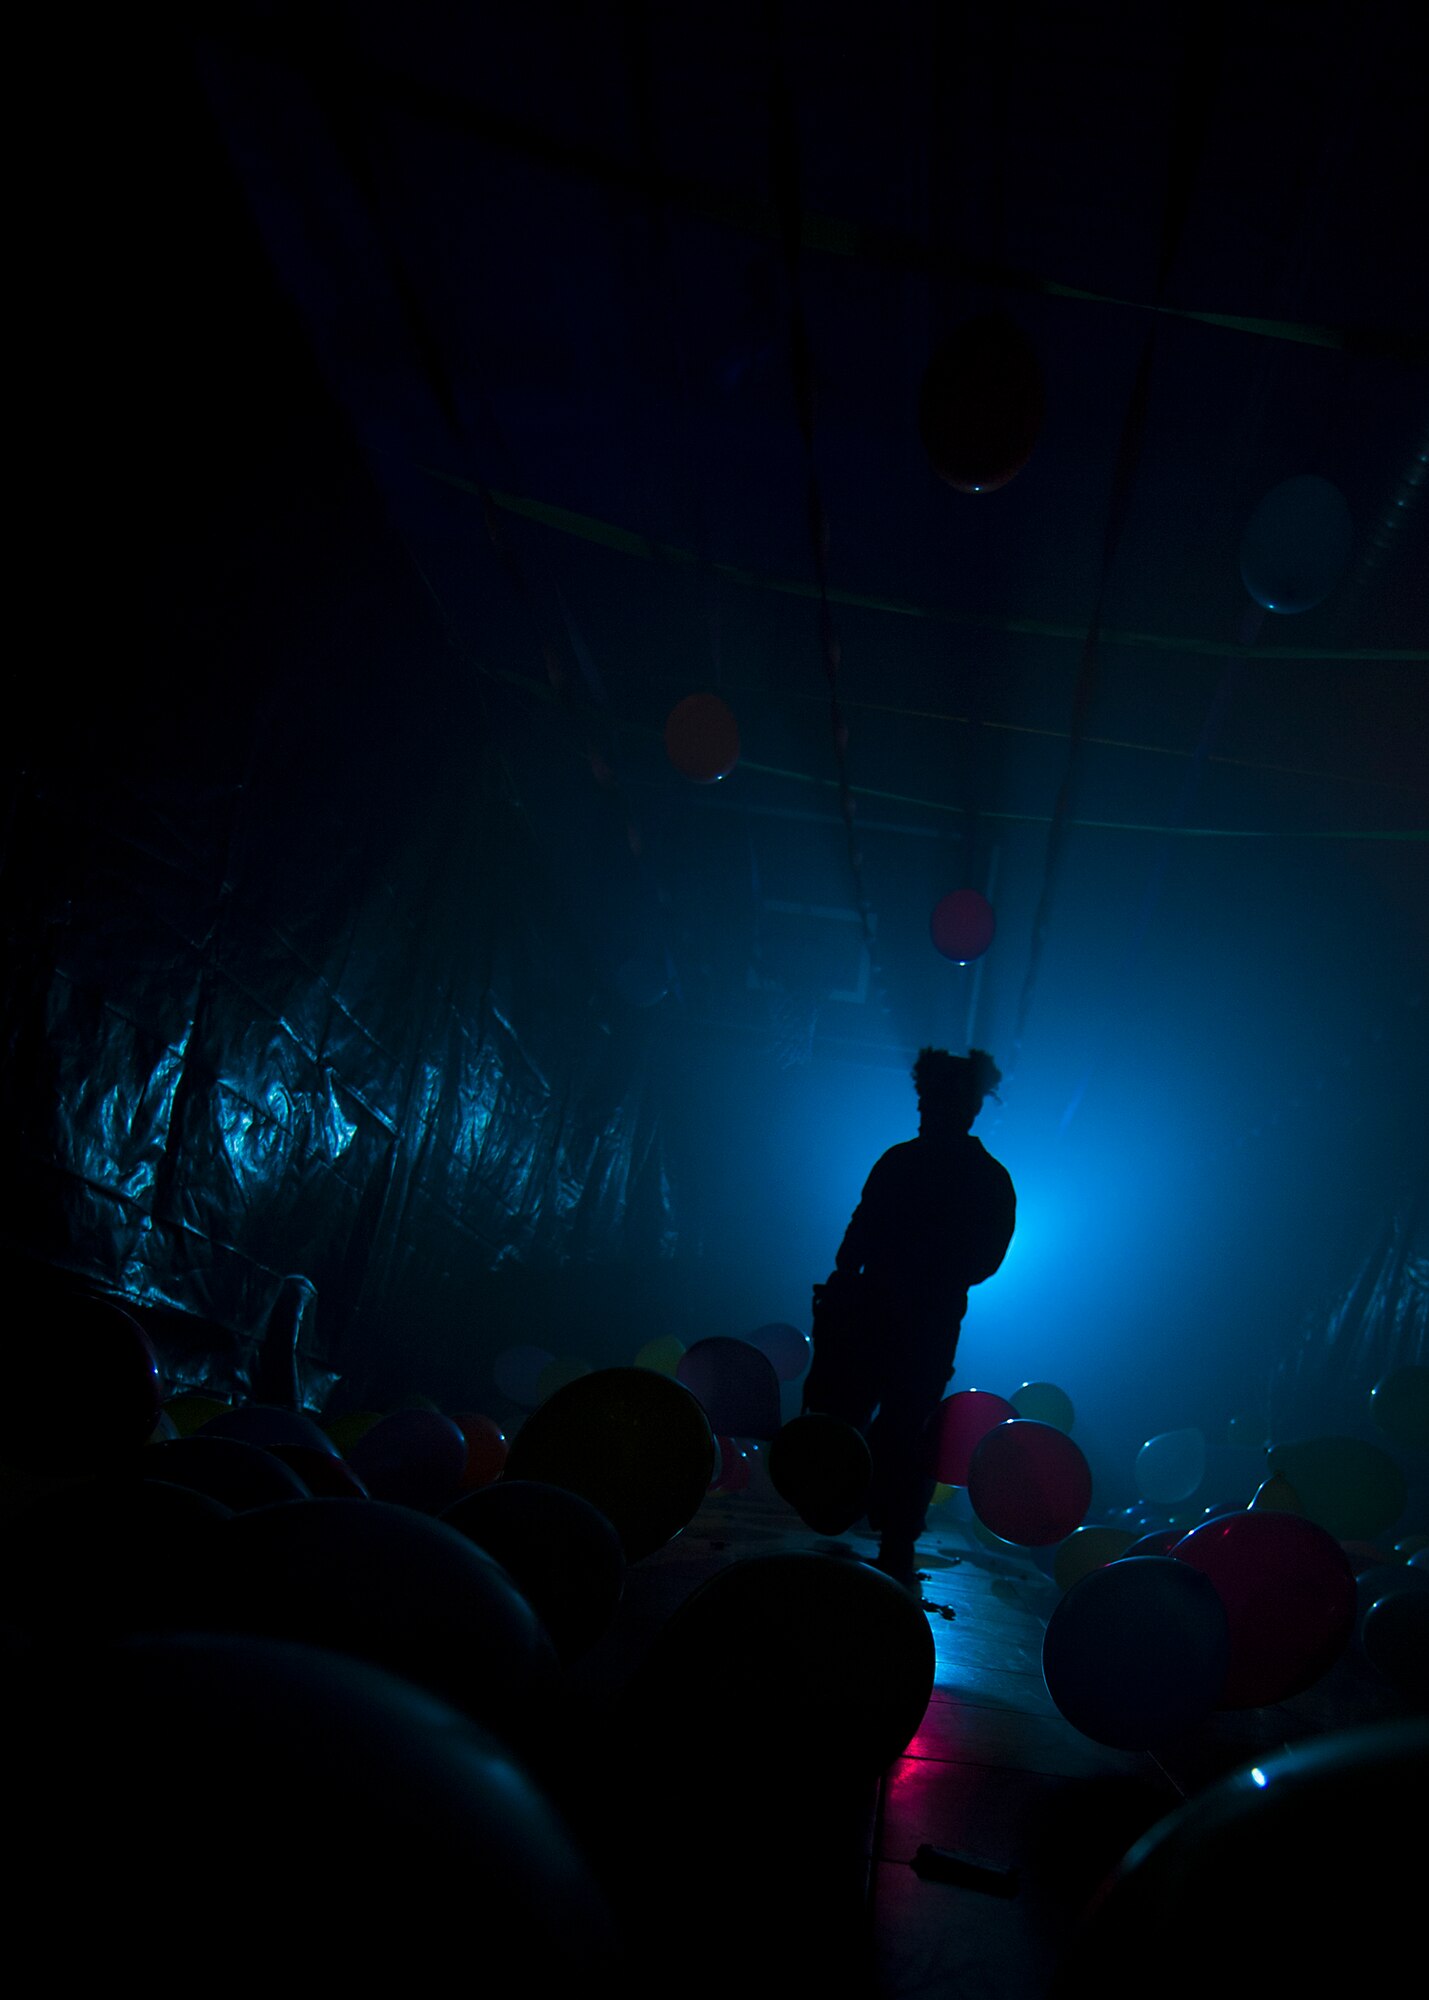 Master Sgt. Ricardo Vela, 7th Munitions Squadron, dressed as a clown with a chainsaw, wanders the haunted party room looking for “victims” Oct. 26, 2012, during the 7th MUNS Haunted House at Dyess Air Force Base, Texas. The haunted house was part of the Fall Carnival held at the Dyess Youth Center, which had games, food and a costume contest. Proceeds from the haunted house went to the youth center. (U.S. Air Force photo by Airman 1st Class Damon Kasberg/ Released)